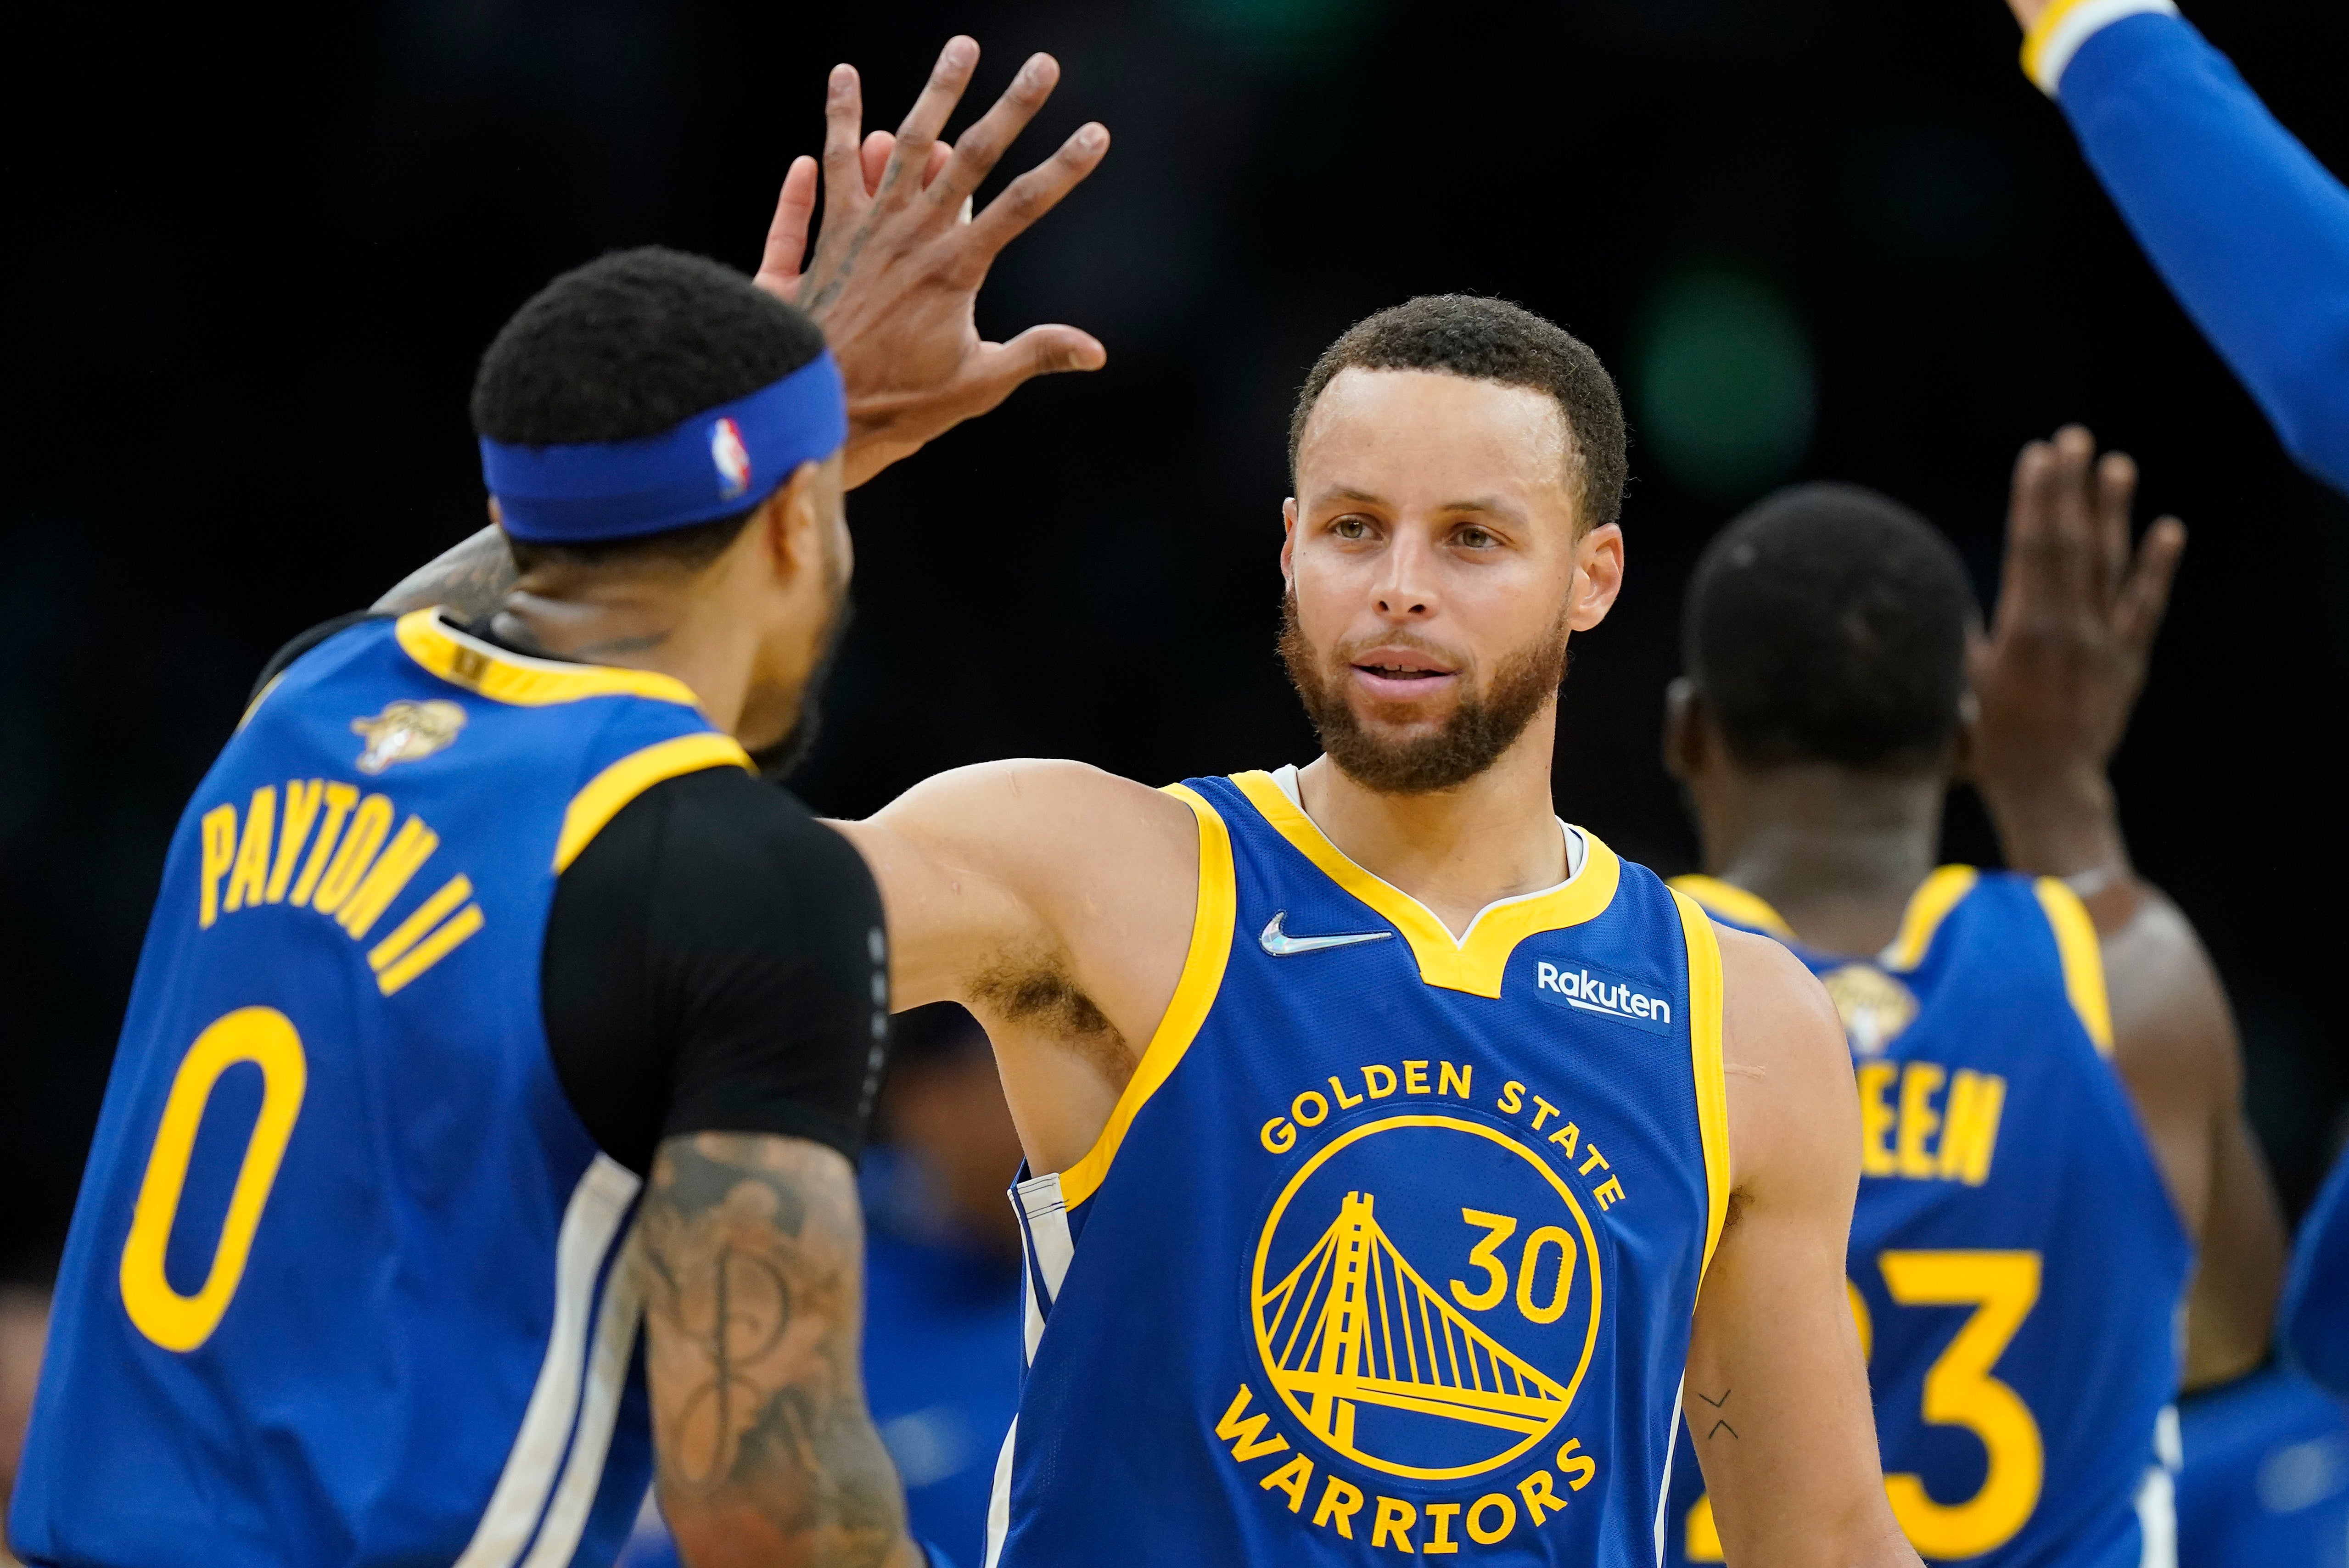 Steph Curry hilariously mocks reporters who said he'd win 'zero' titles |  The Independent